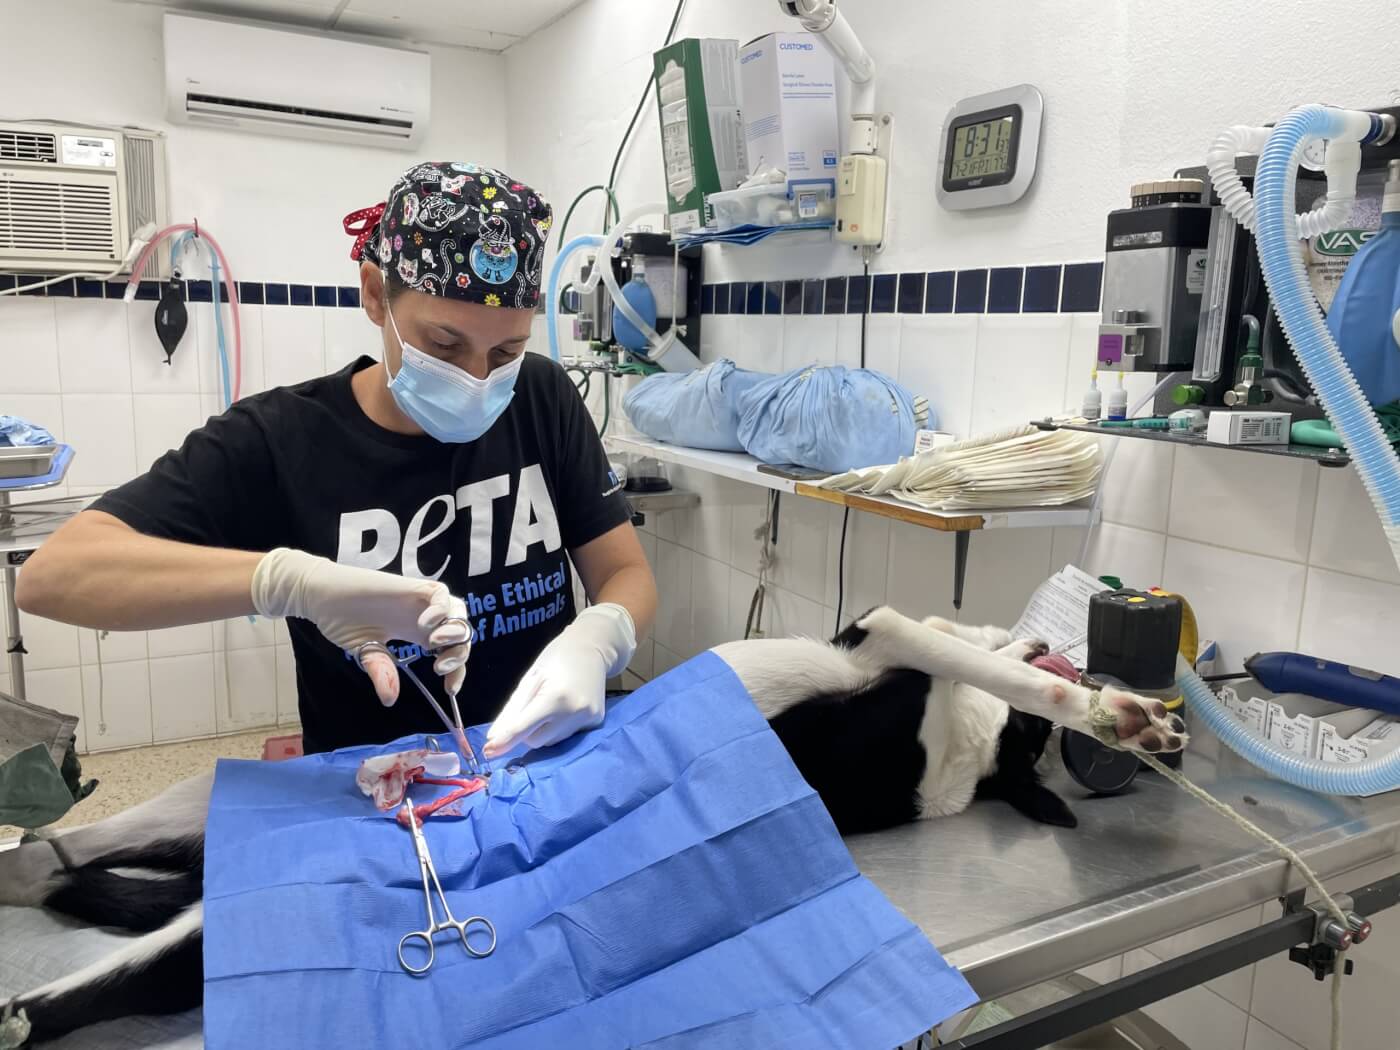 A PETA veterinary surgeon in an operating room, performing a procedure on an anesthetized dog.